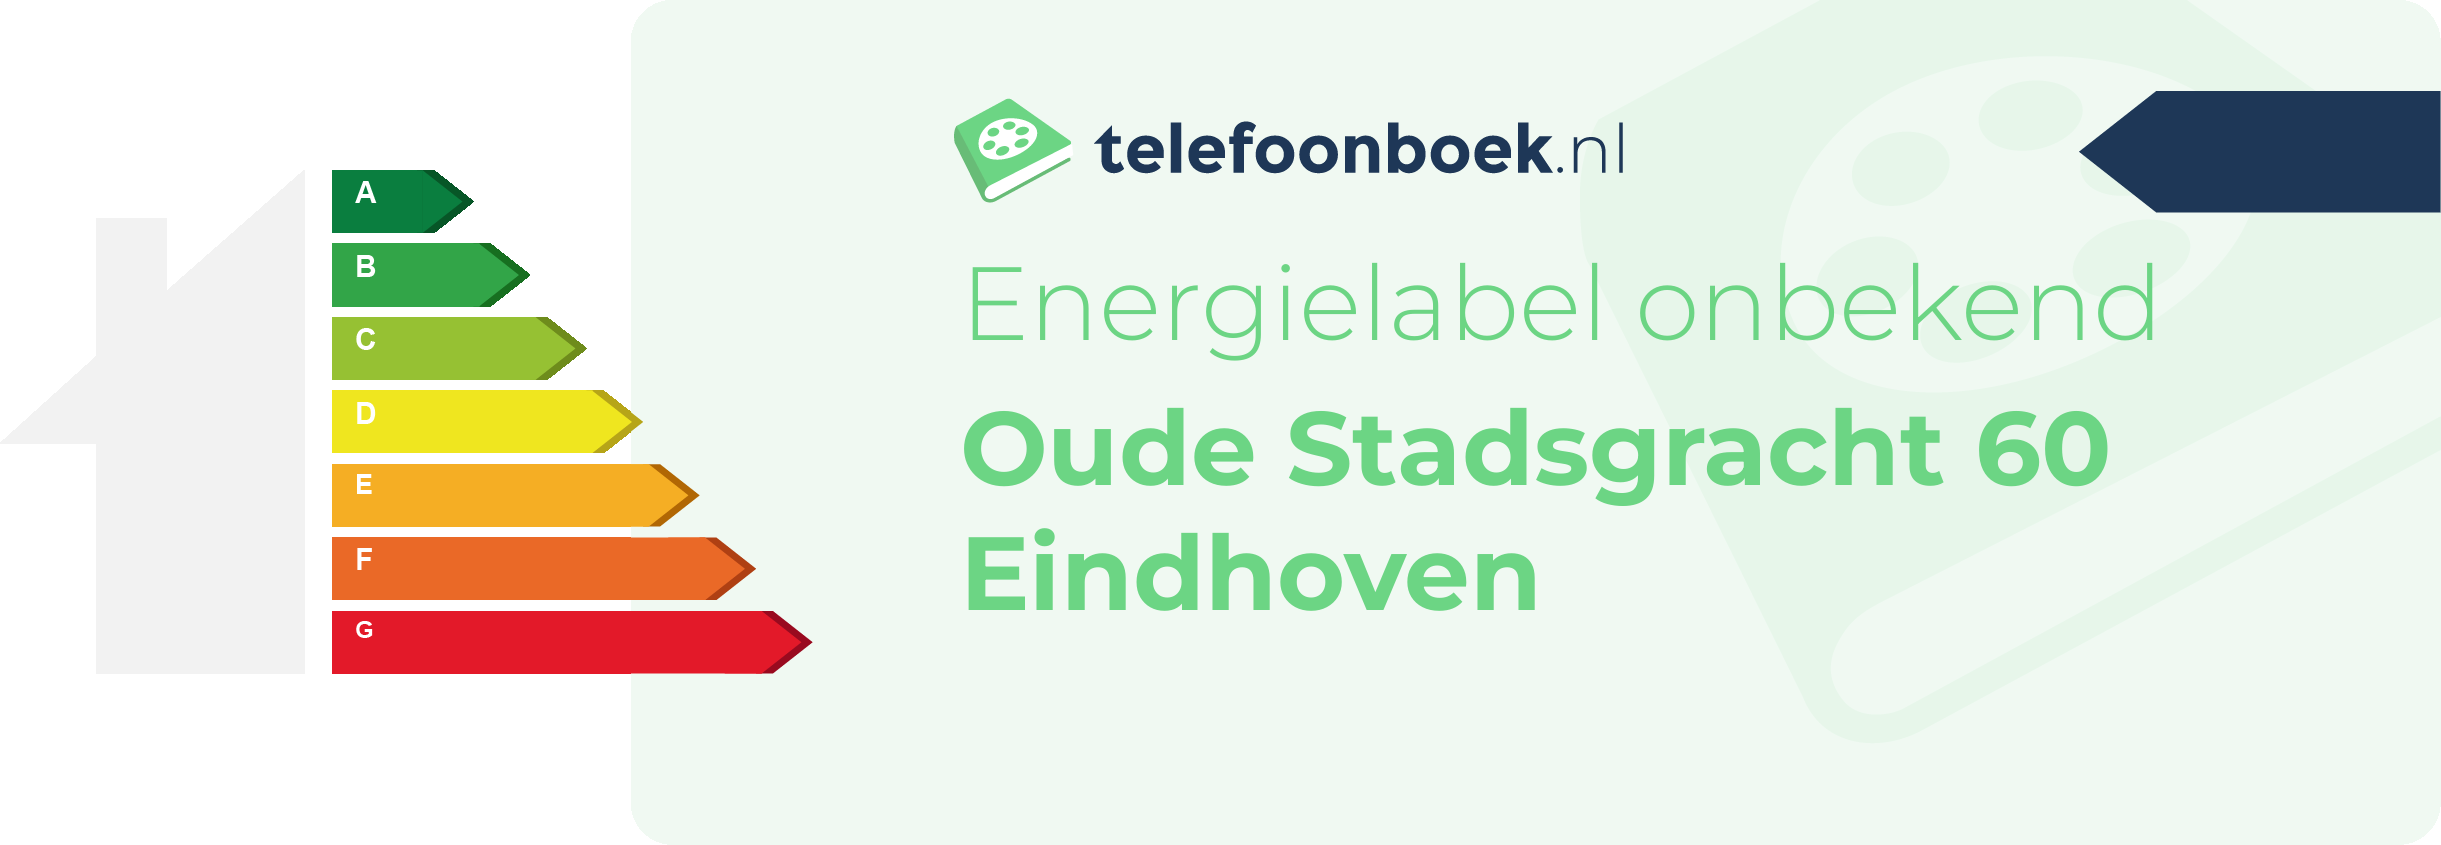 Energielabel Oude Stadsgracht 60 Eindhoven